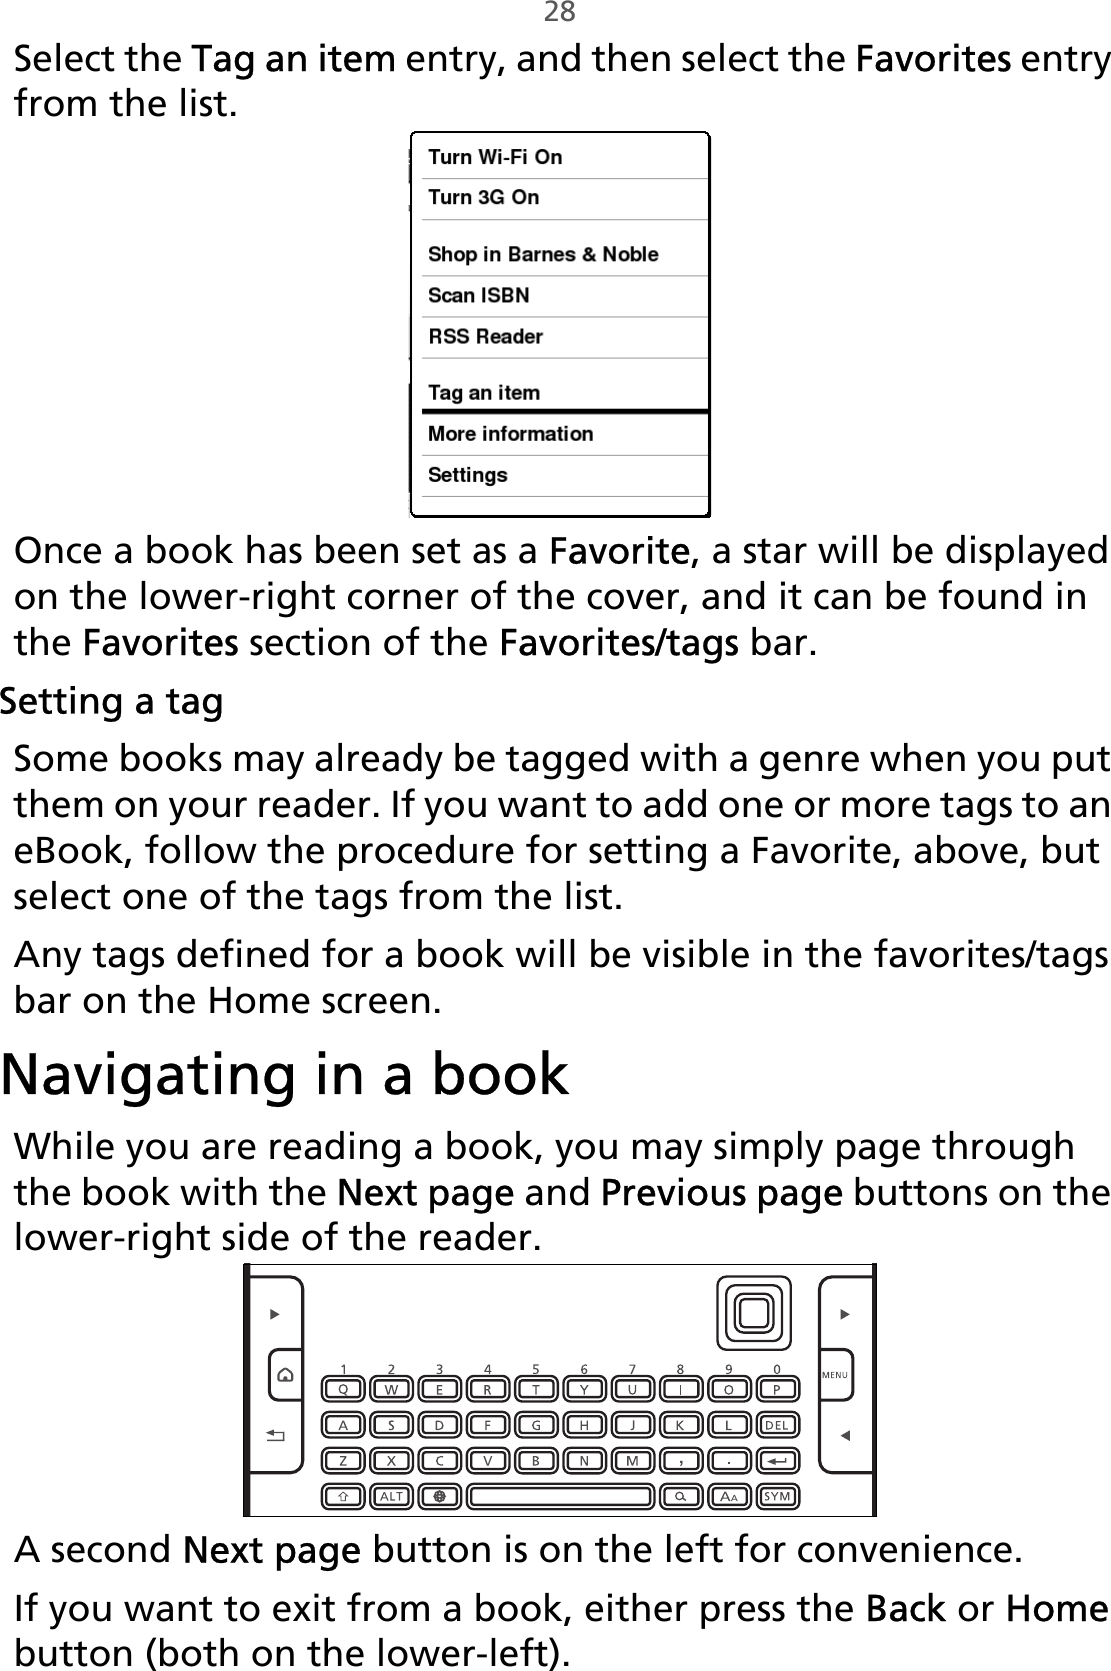 28Select the Tag an item entry, and then select the Favorites entry from the list.Once a book has been set as a Favorite, a star will be displayed on the lower-right corner of the cover, and it can be found in the Favorites section of the Favorites/tags bar.Setting a tagSome books may already be tagged with a genre when you put them on your reader. If you want to add one or more tags to an eBook, follow the procedure for setting a Favorite, above, but select one of the tags from the list.Any tags defined for a book will be visible in the favorites/tags bar on the Home screen. Navigating in a bookWhile you are reading a book, you may simply page through the book with the Next page and Previous page buttons on the lower-right side of the reader.,A second Next page button is on the left for convenience.If you want to exit from a book, either press the Back or Home button (both on the lower-left).